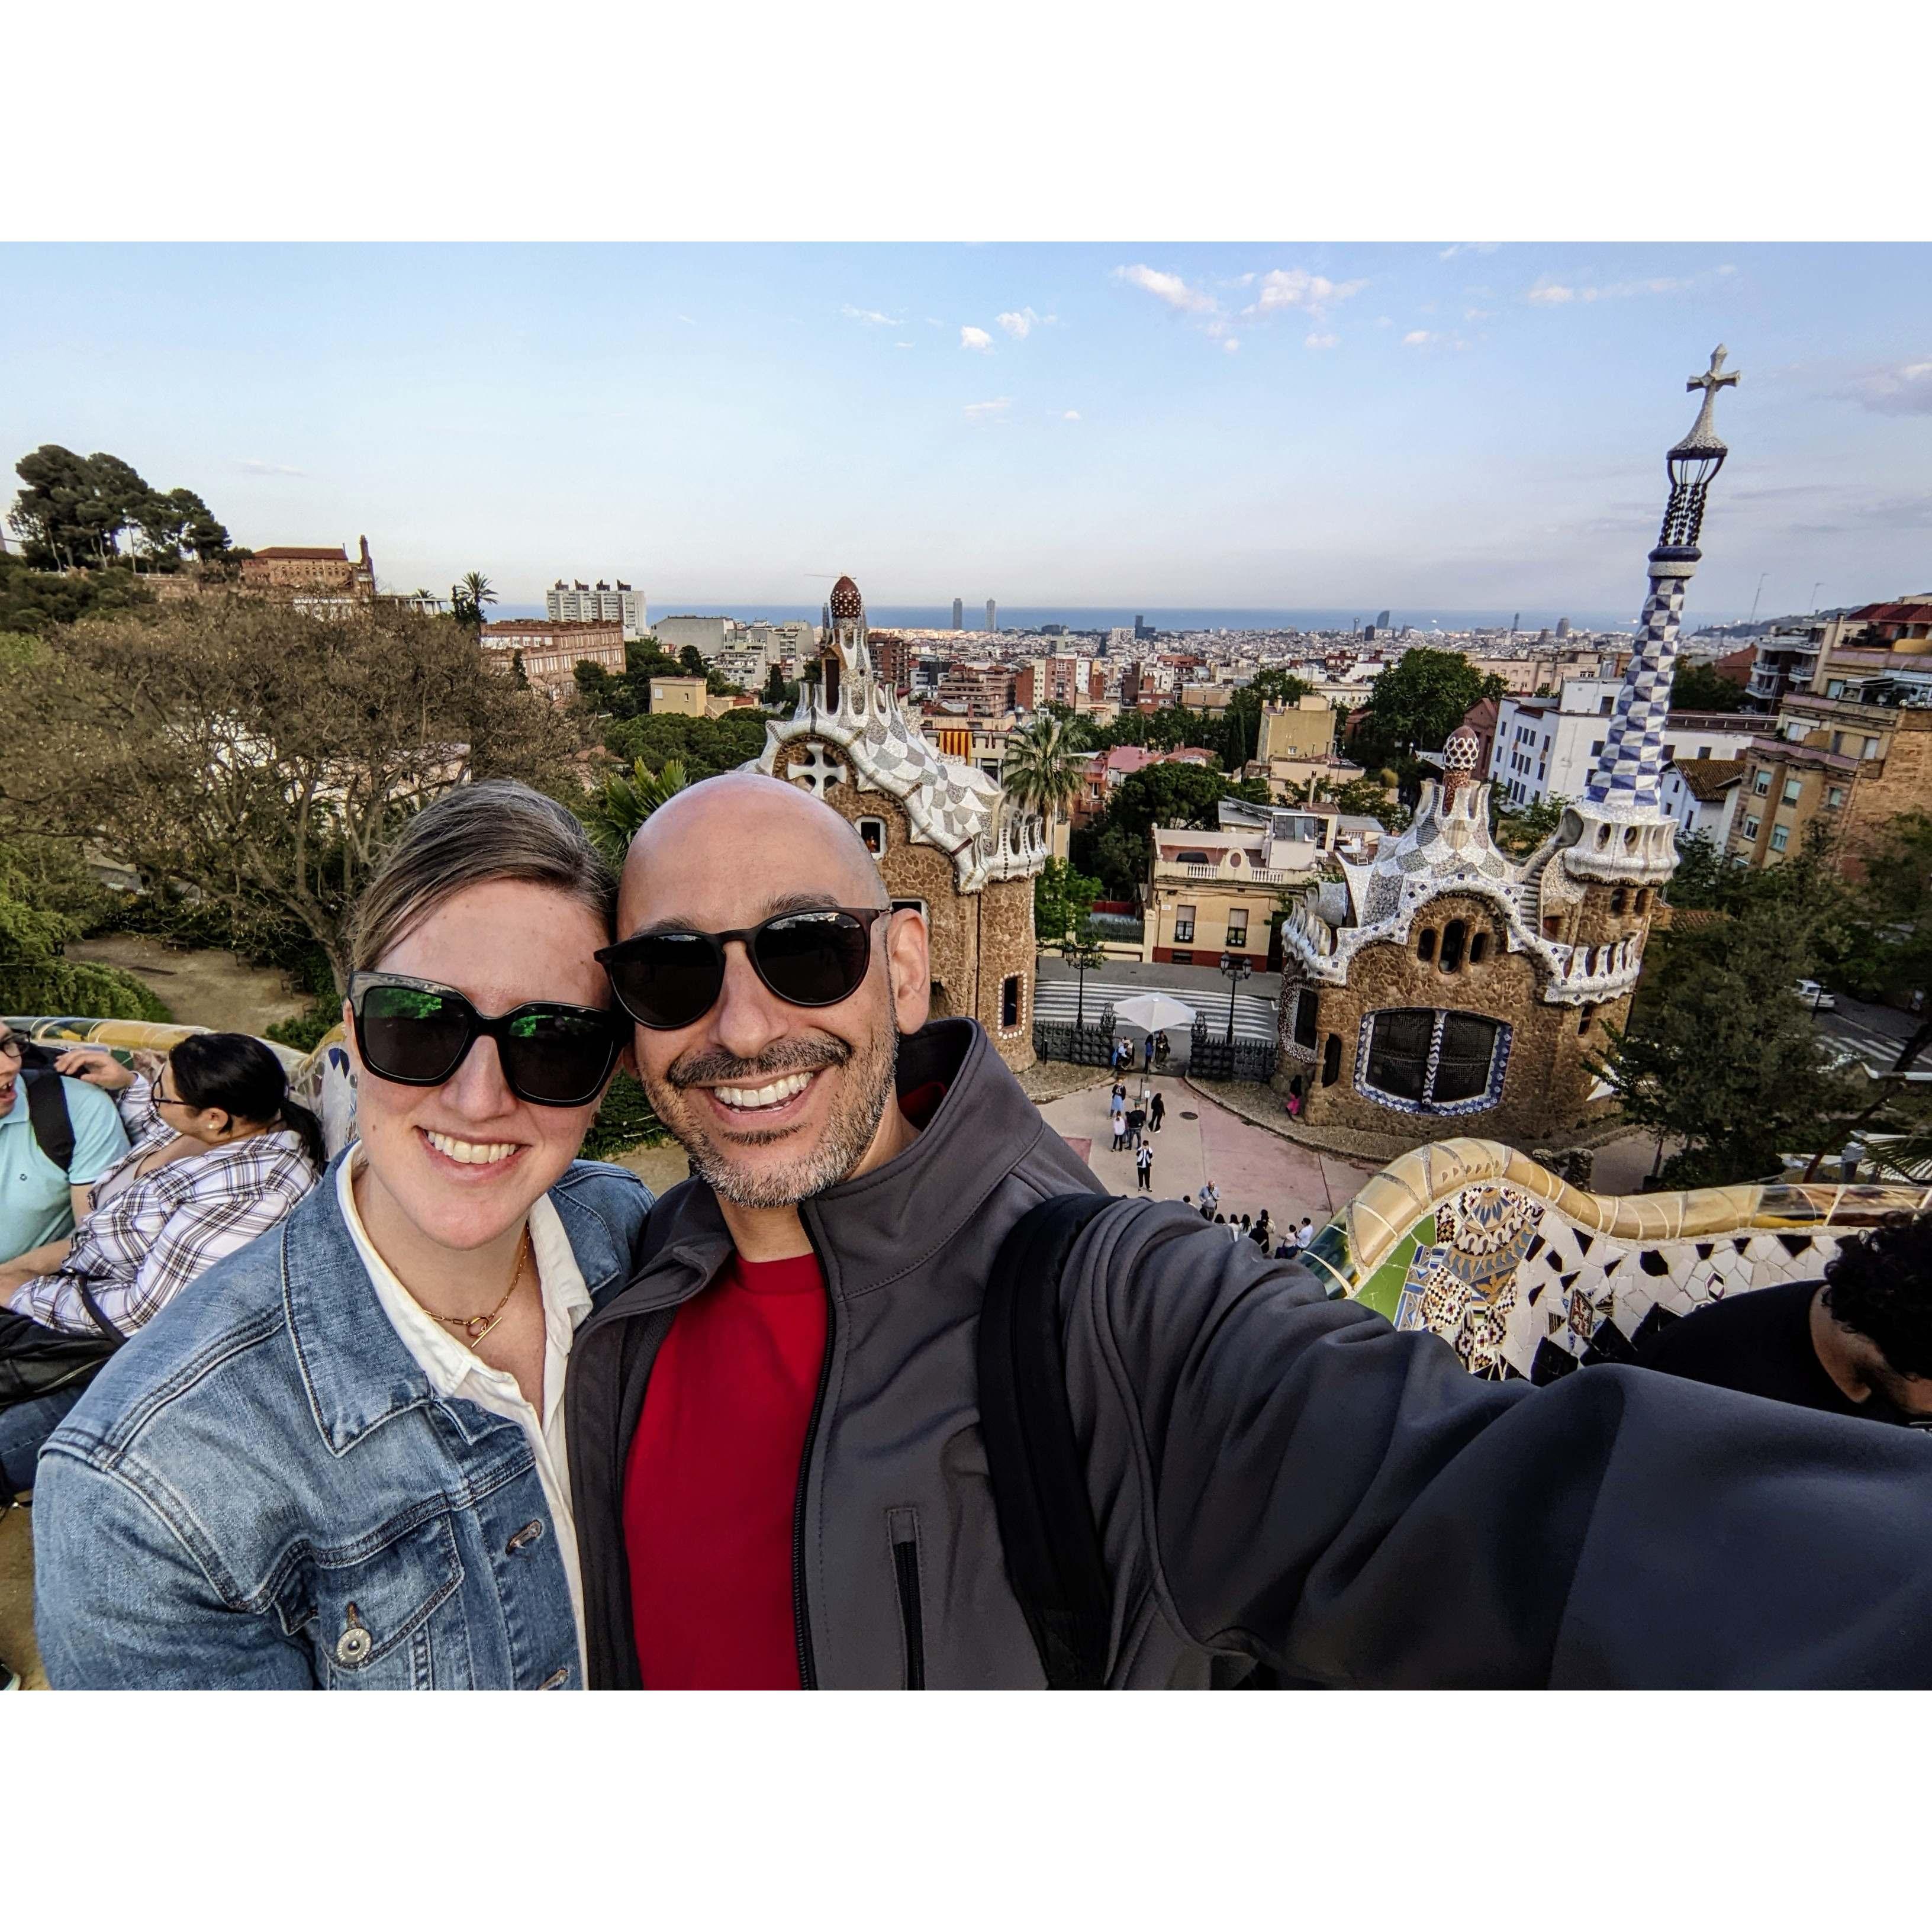 Park Guell in Barcelona, minutes before Stephen proposed.